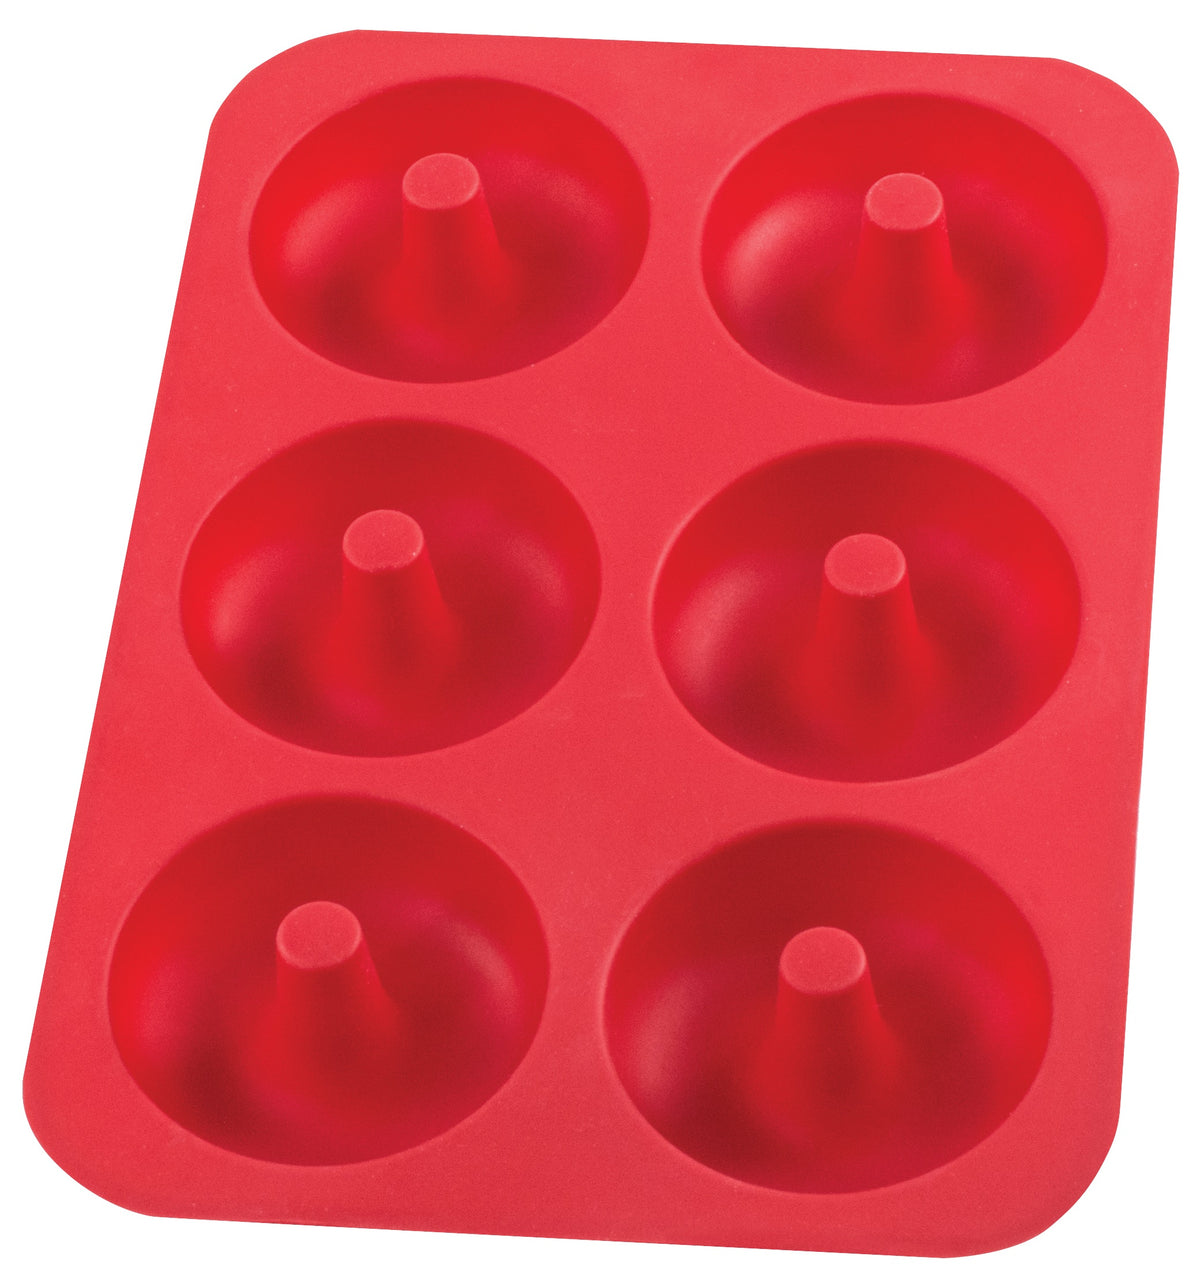 Mrs. Anderson's 43840 Baking Donut Pan, Red